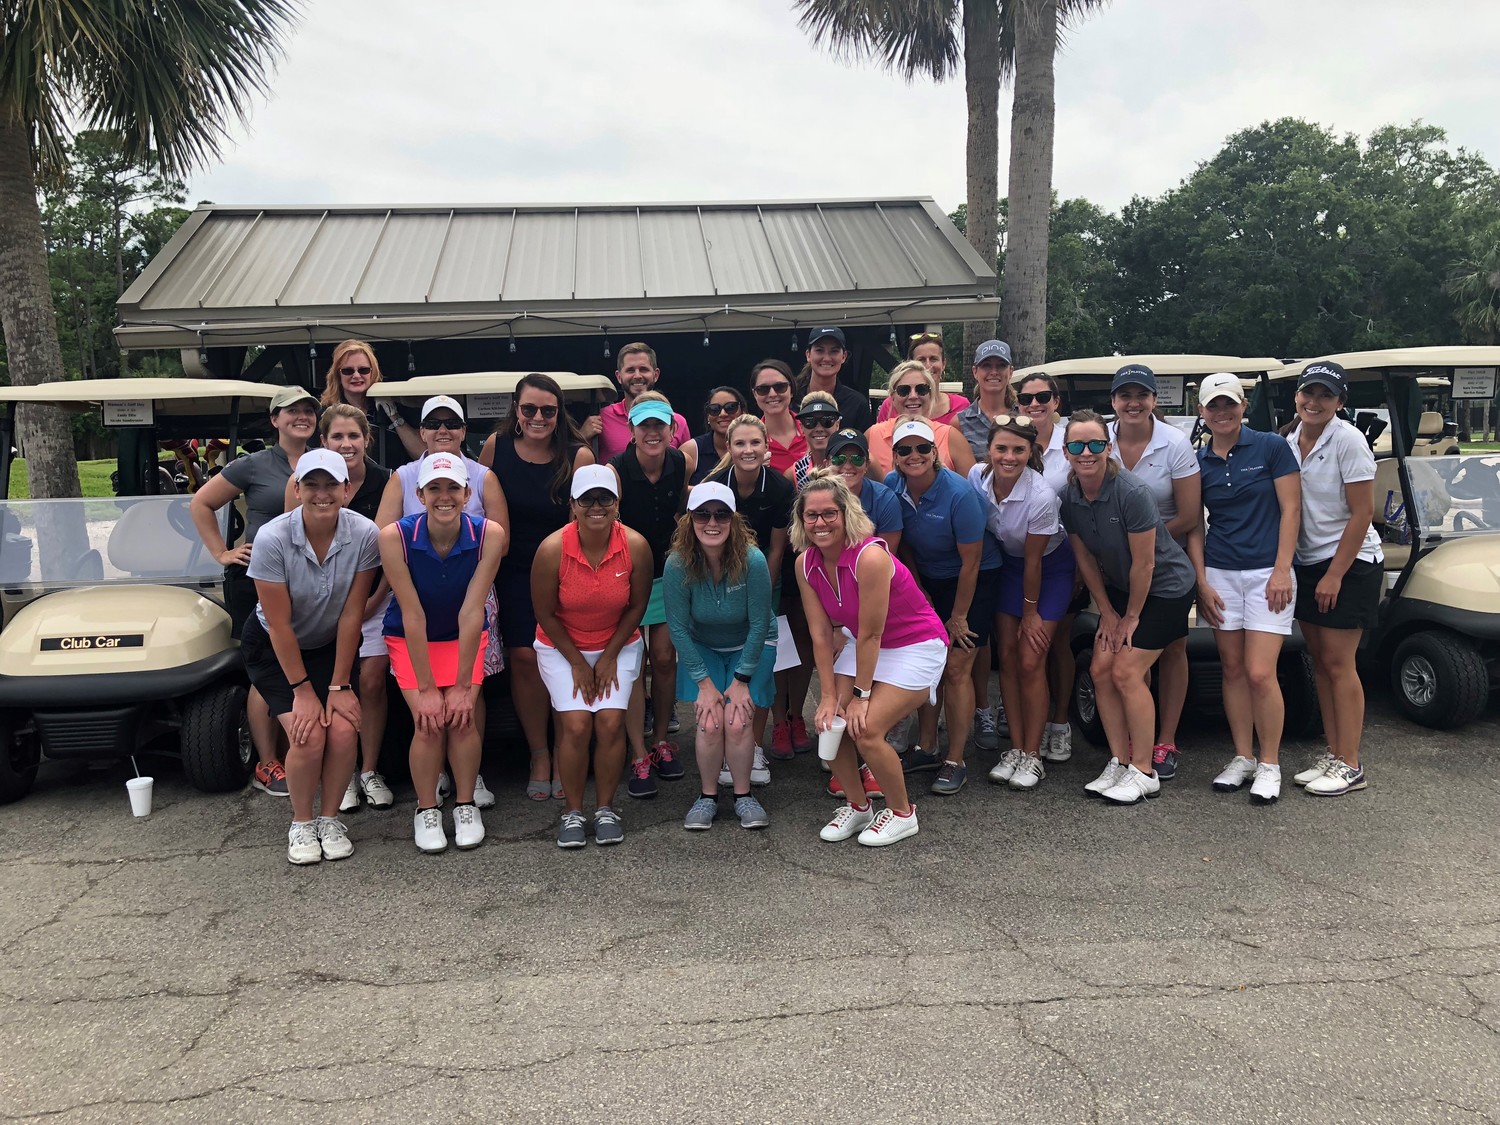 A group of PGA Tour female employees played the Oak Bridge Club at Sawgrass on June 5 to celebrate Women’s Golf Day. People all over the world participated in similar events to showcase golf and introduce the game to more women and girls.